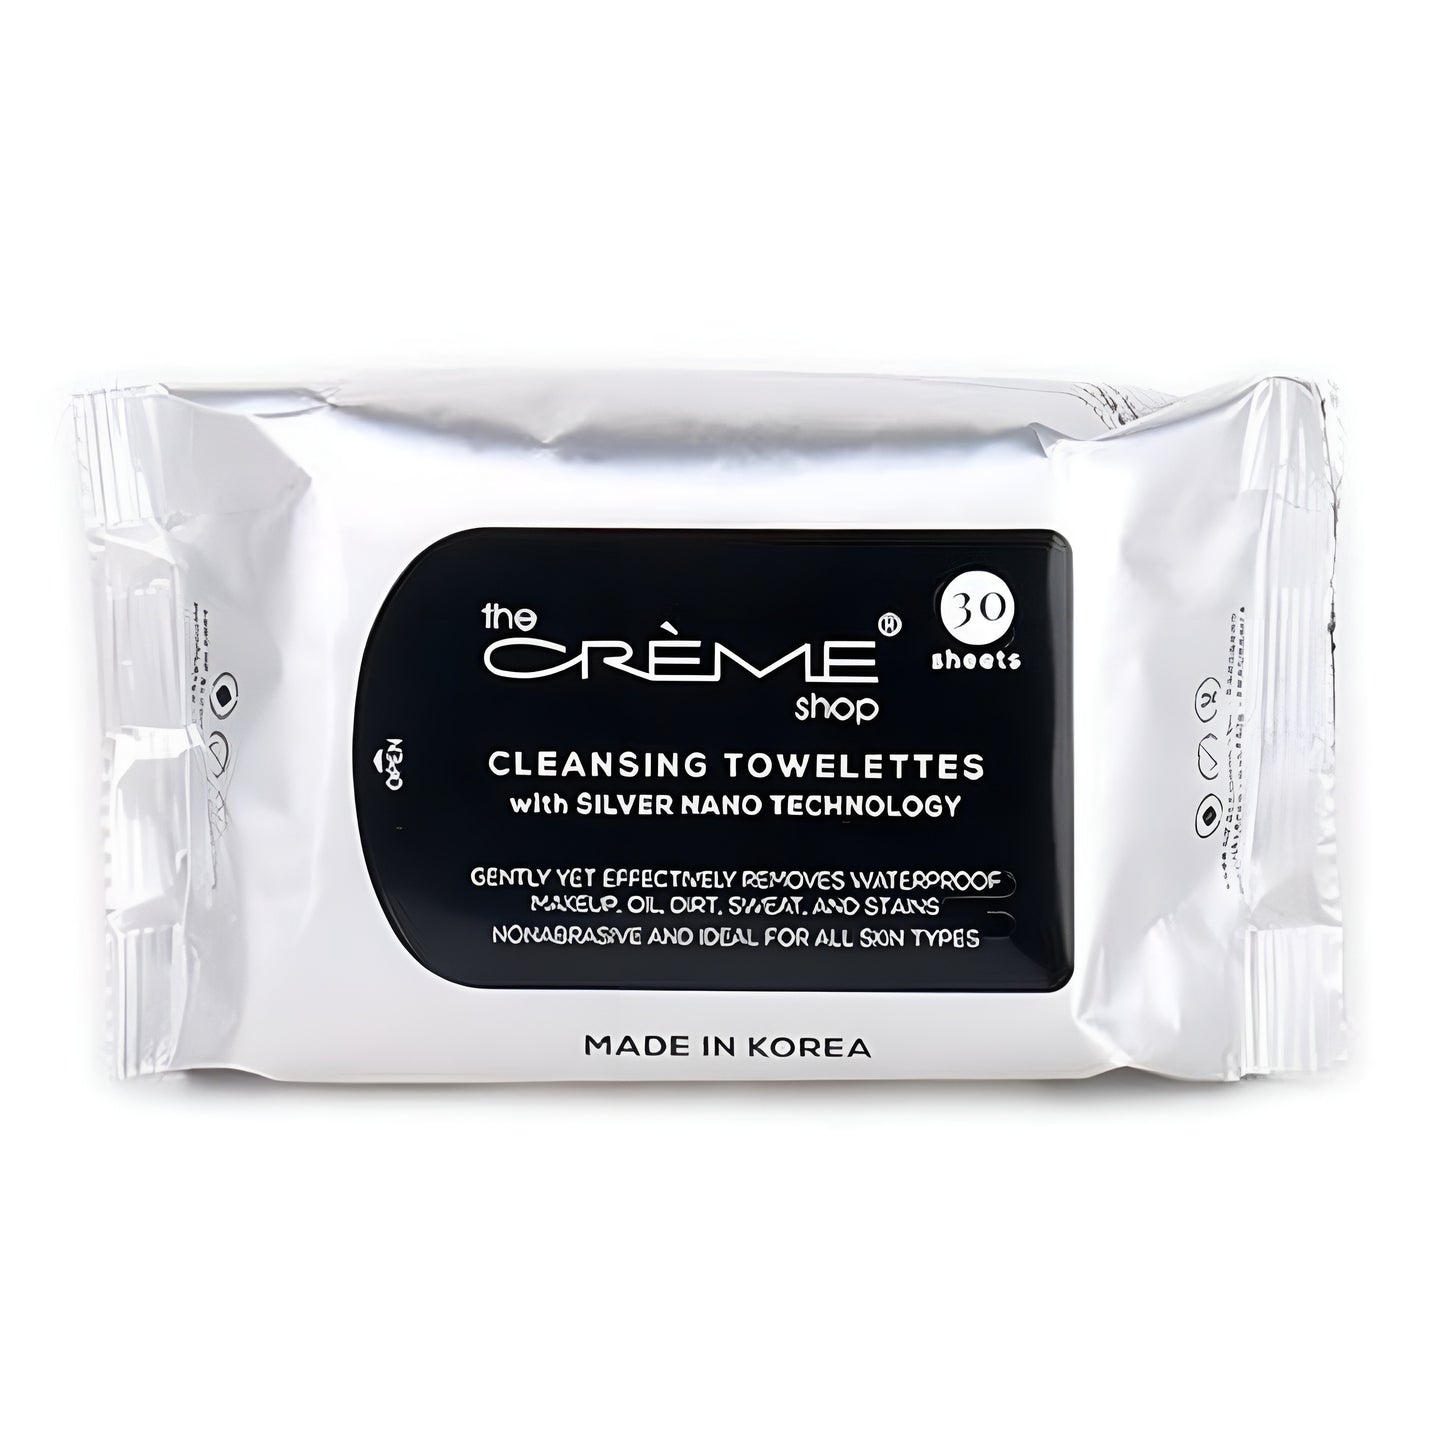 The Creme Shop Cleansing Towelettes | 30 Sheets | Silver Nano Technology